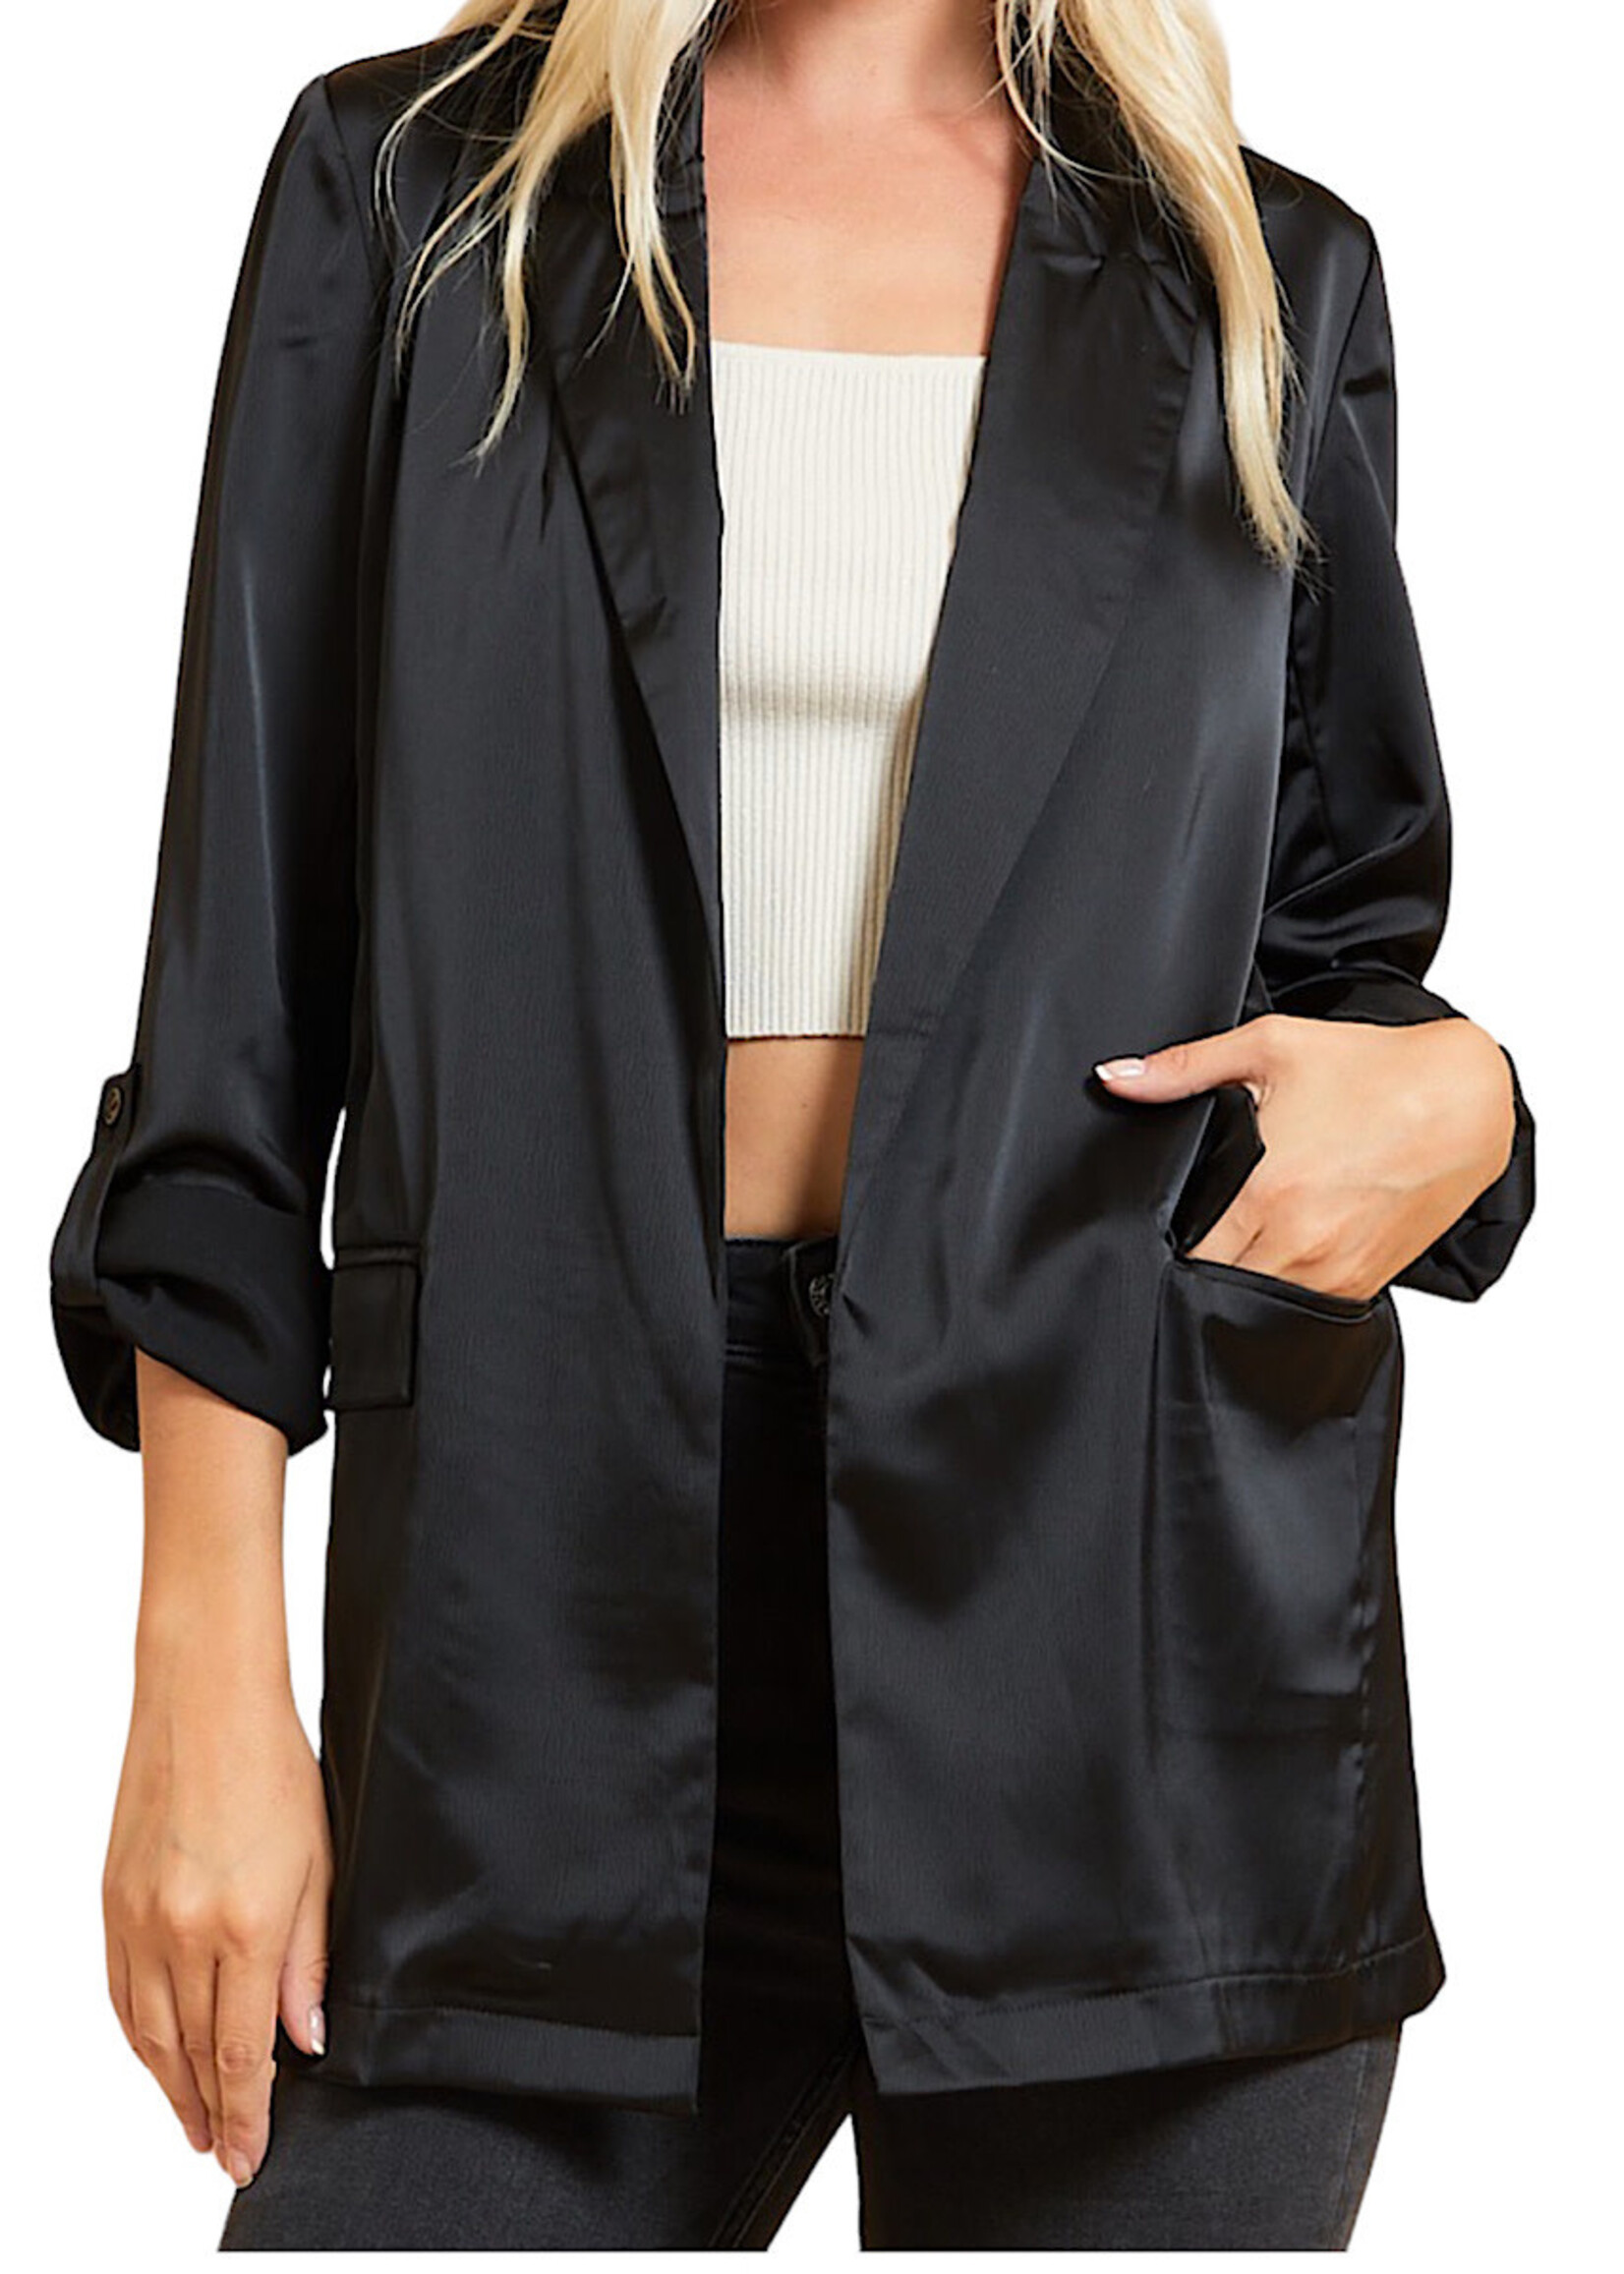 Black Blazer With Rolled Up Sleeve